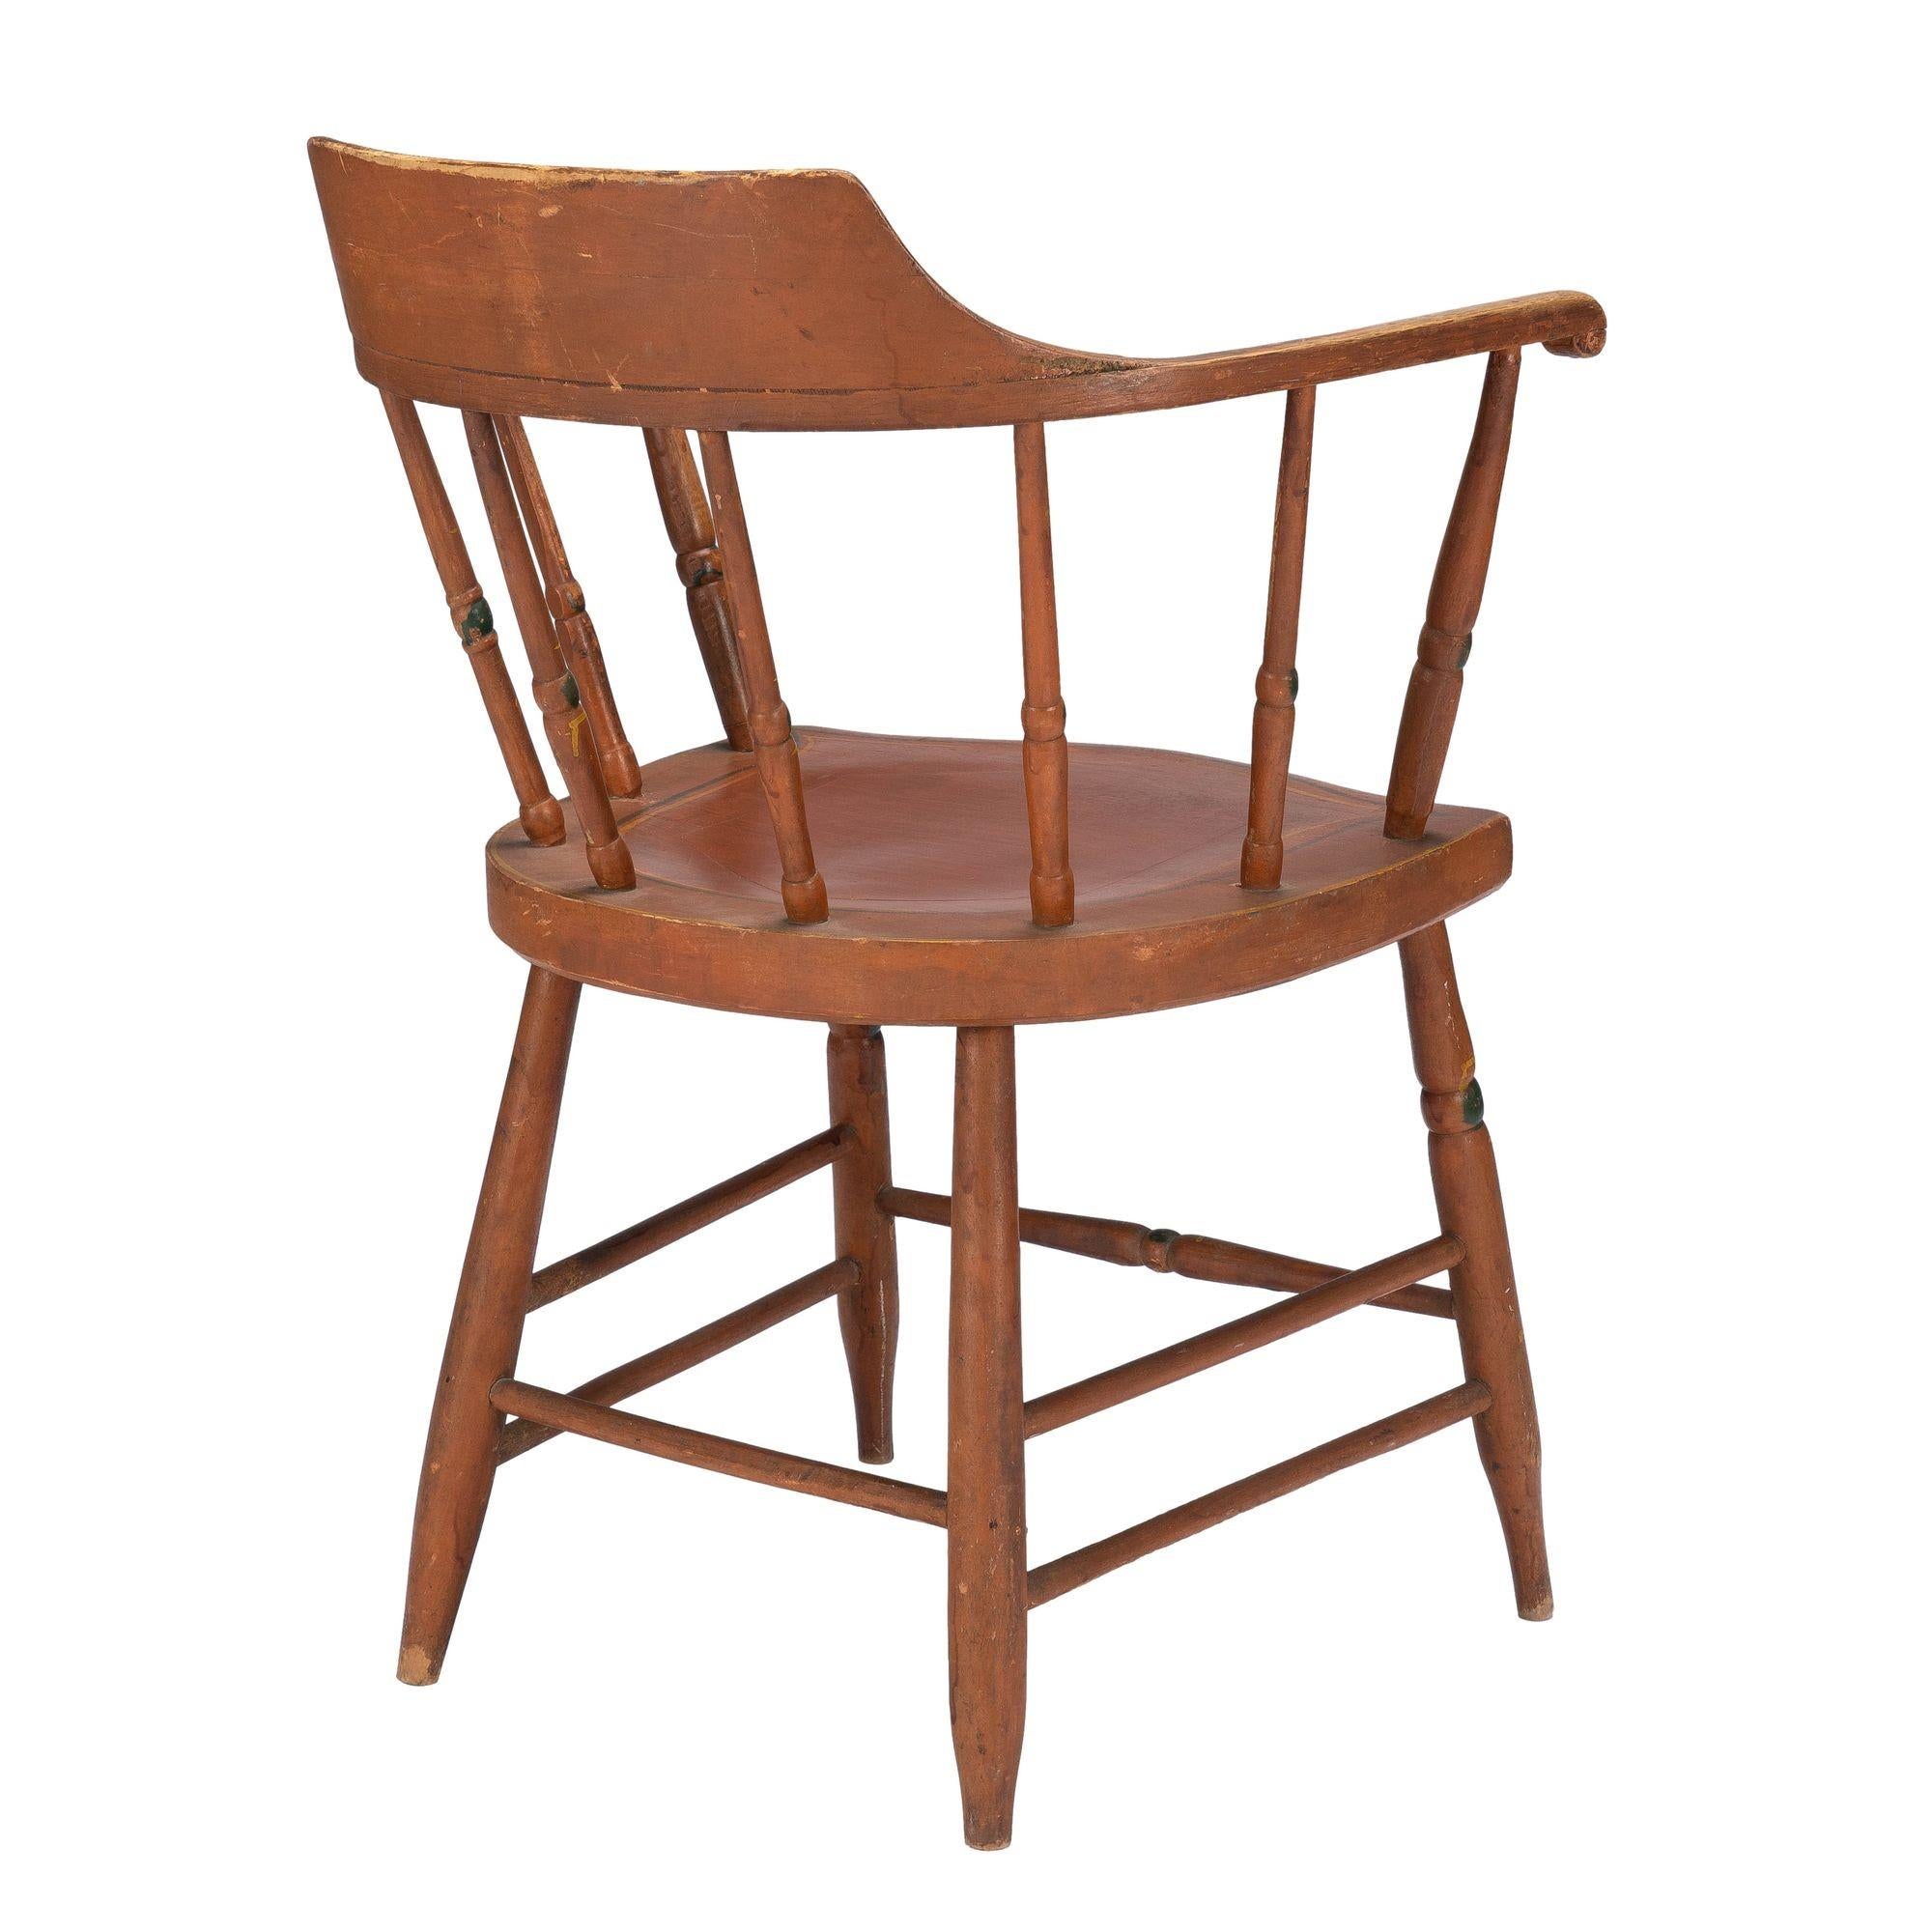 Wood American Painted Windsor Captain's Chair, c. 1820 For Sale